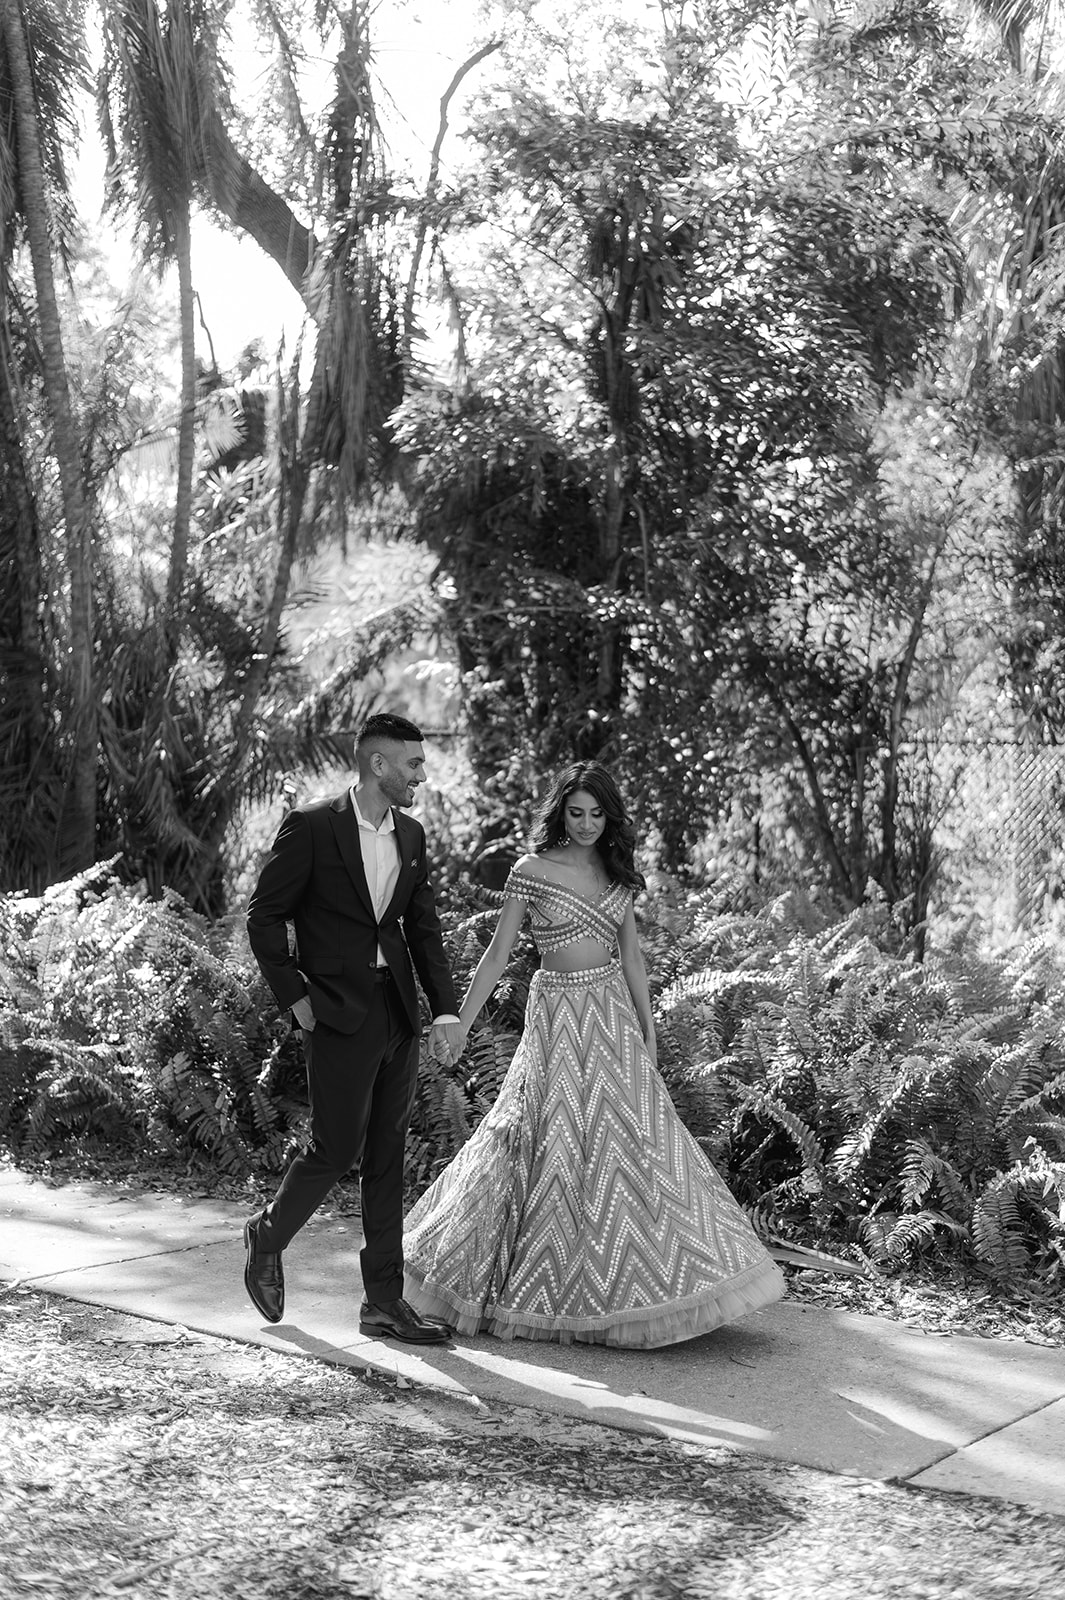 "Elegant and romantic engagement session at the Ringling Museum with stunning Indian attire"
